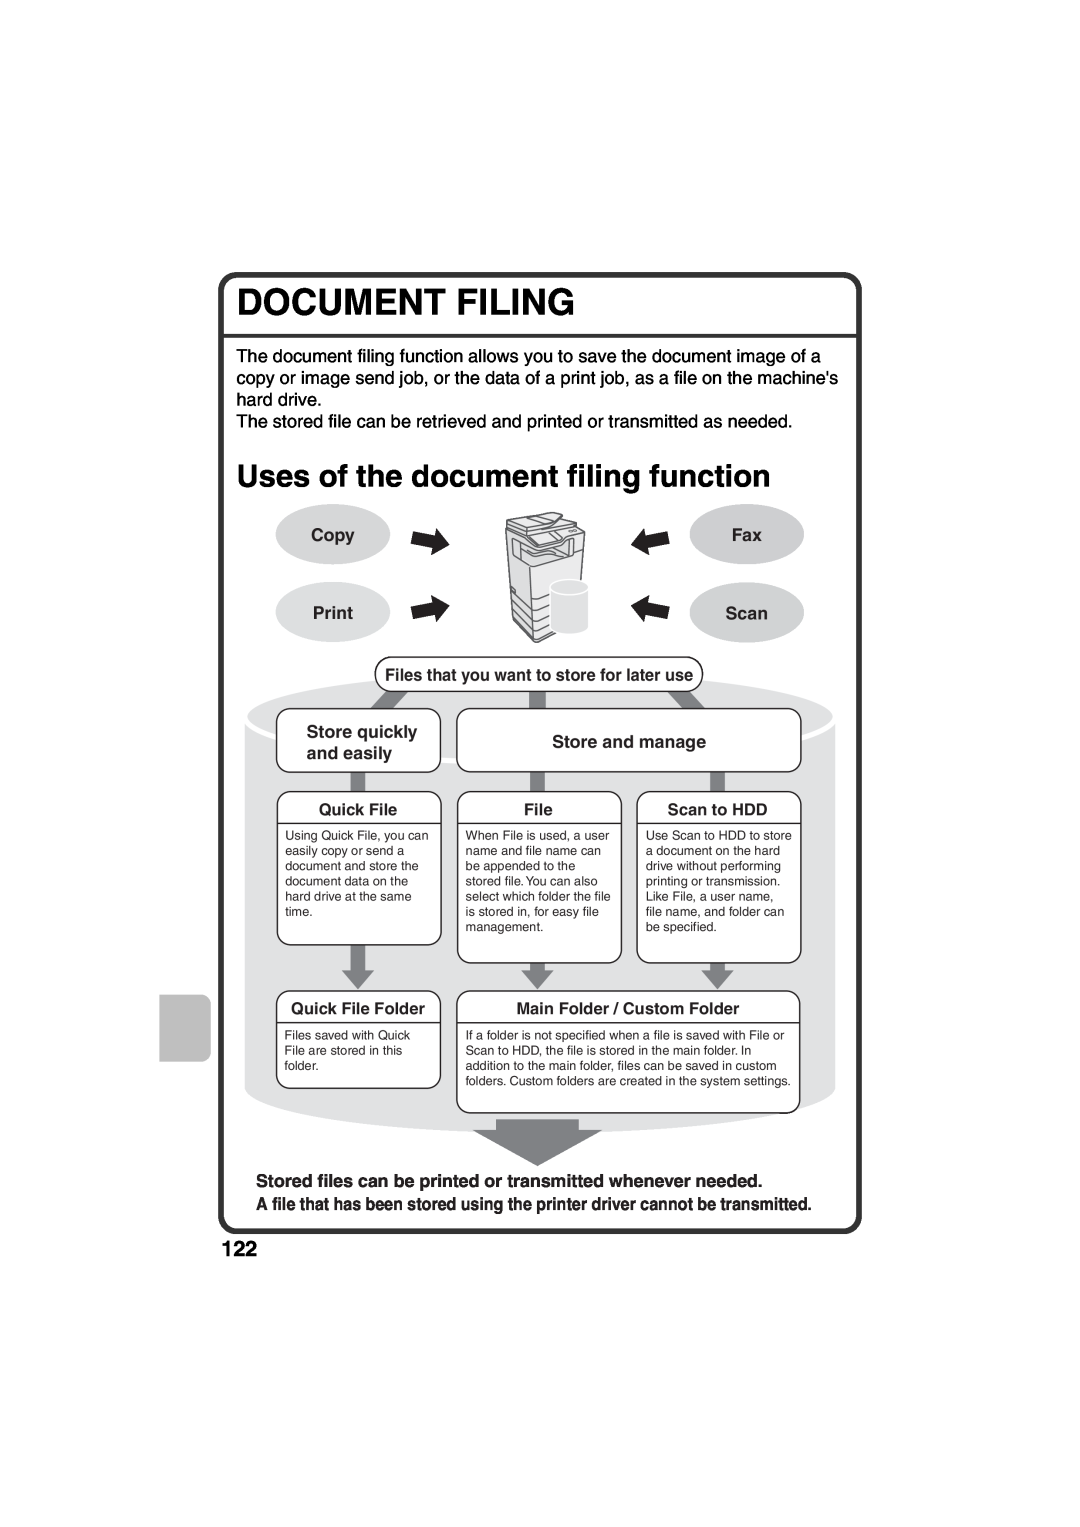 Sharp MX-C311, MX-C381 Document Filing, Uses of the document filing function, Copy, Print, and easily, Store and manage 